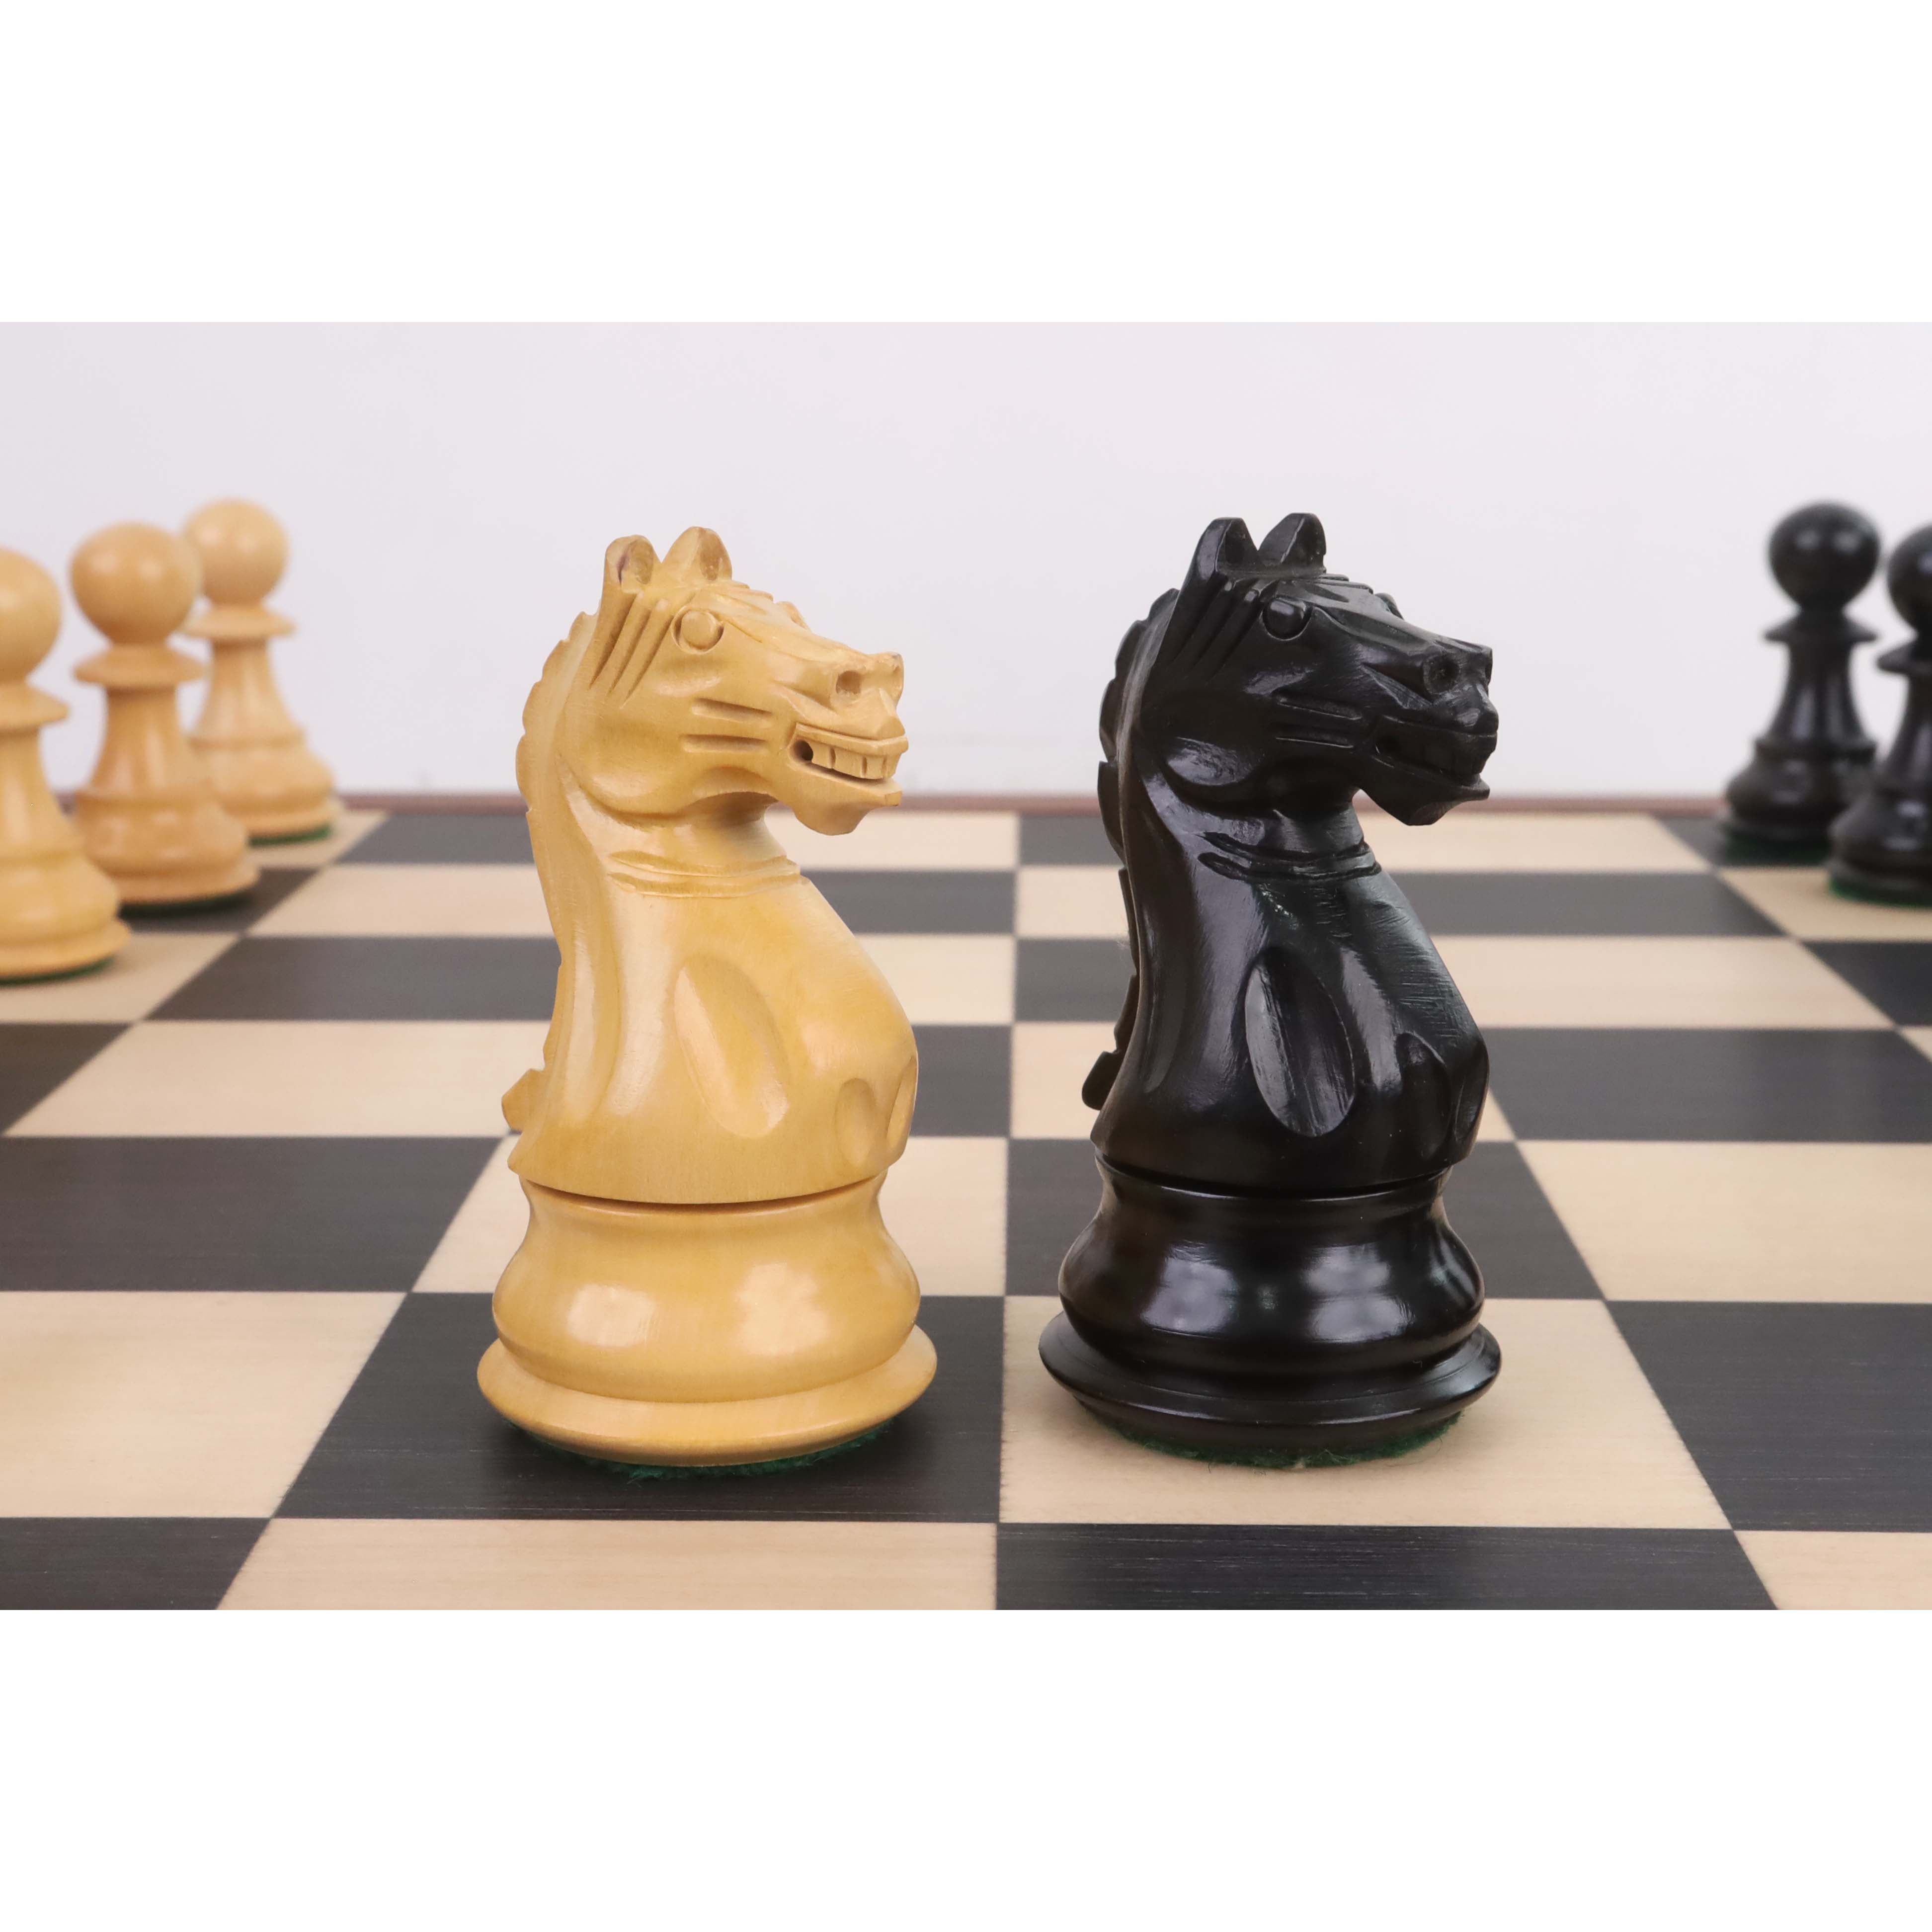 4" Fierce Knight Staunton Chess Pieces Only set - Weighted Ebonised Boxwood